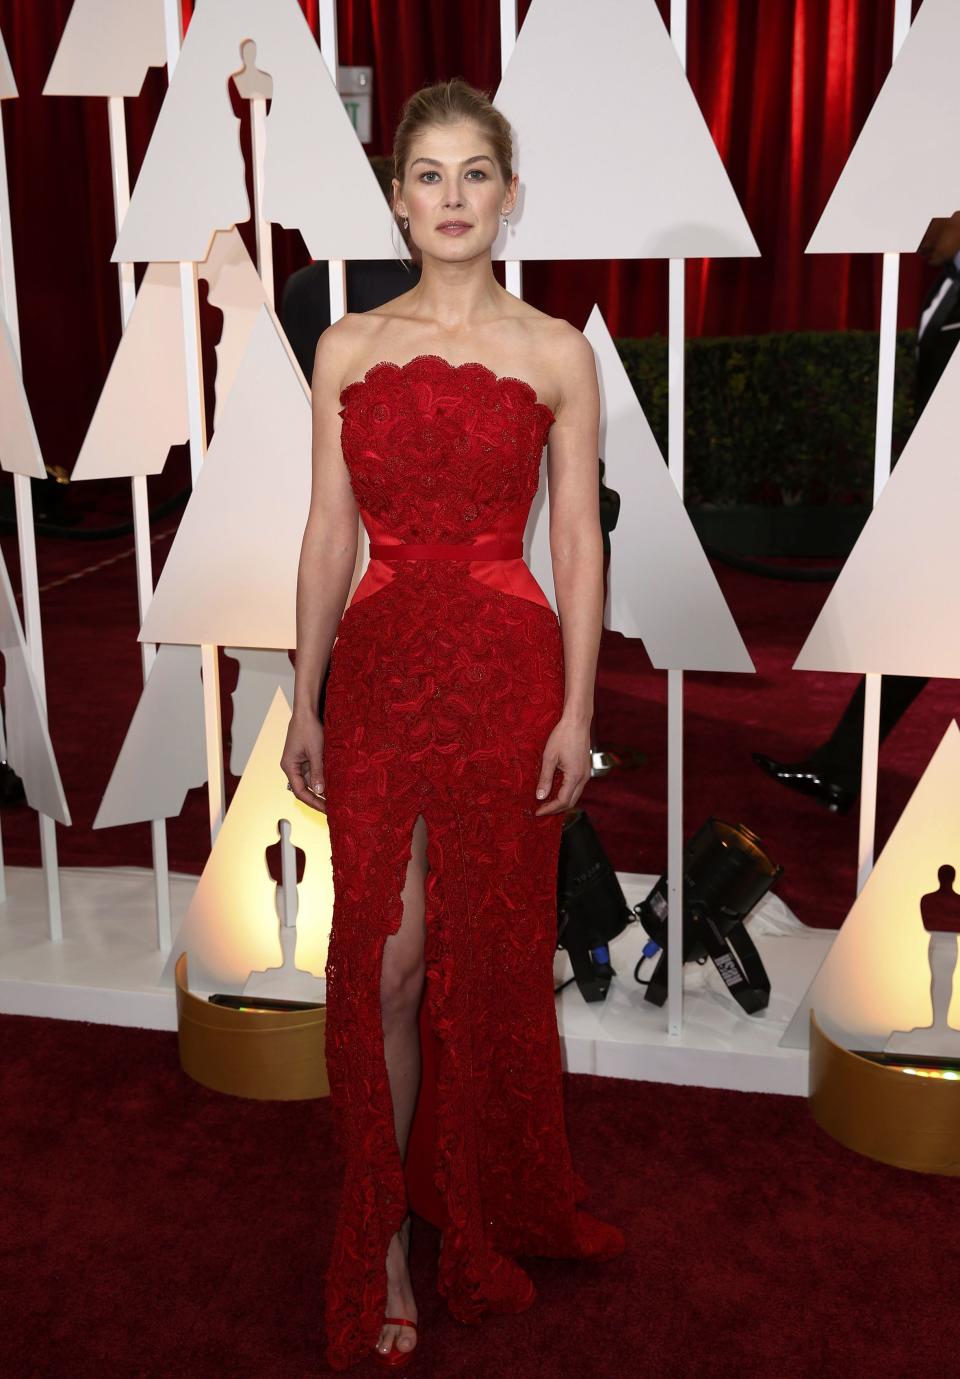 Best actress nominee Pike poses on the red carpet as she arrives at the 87th Academy Awards in Hollywood